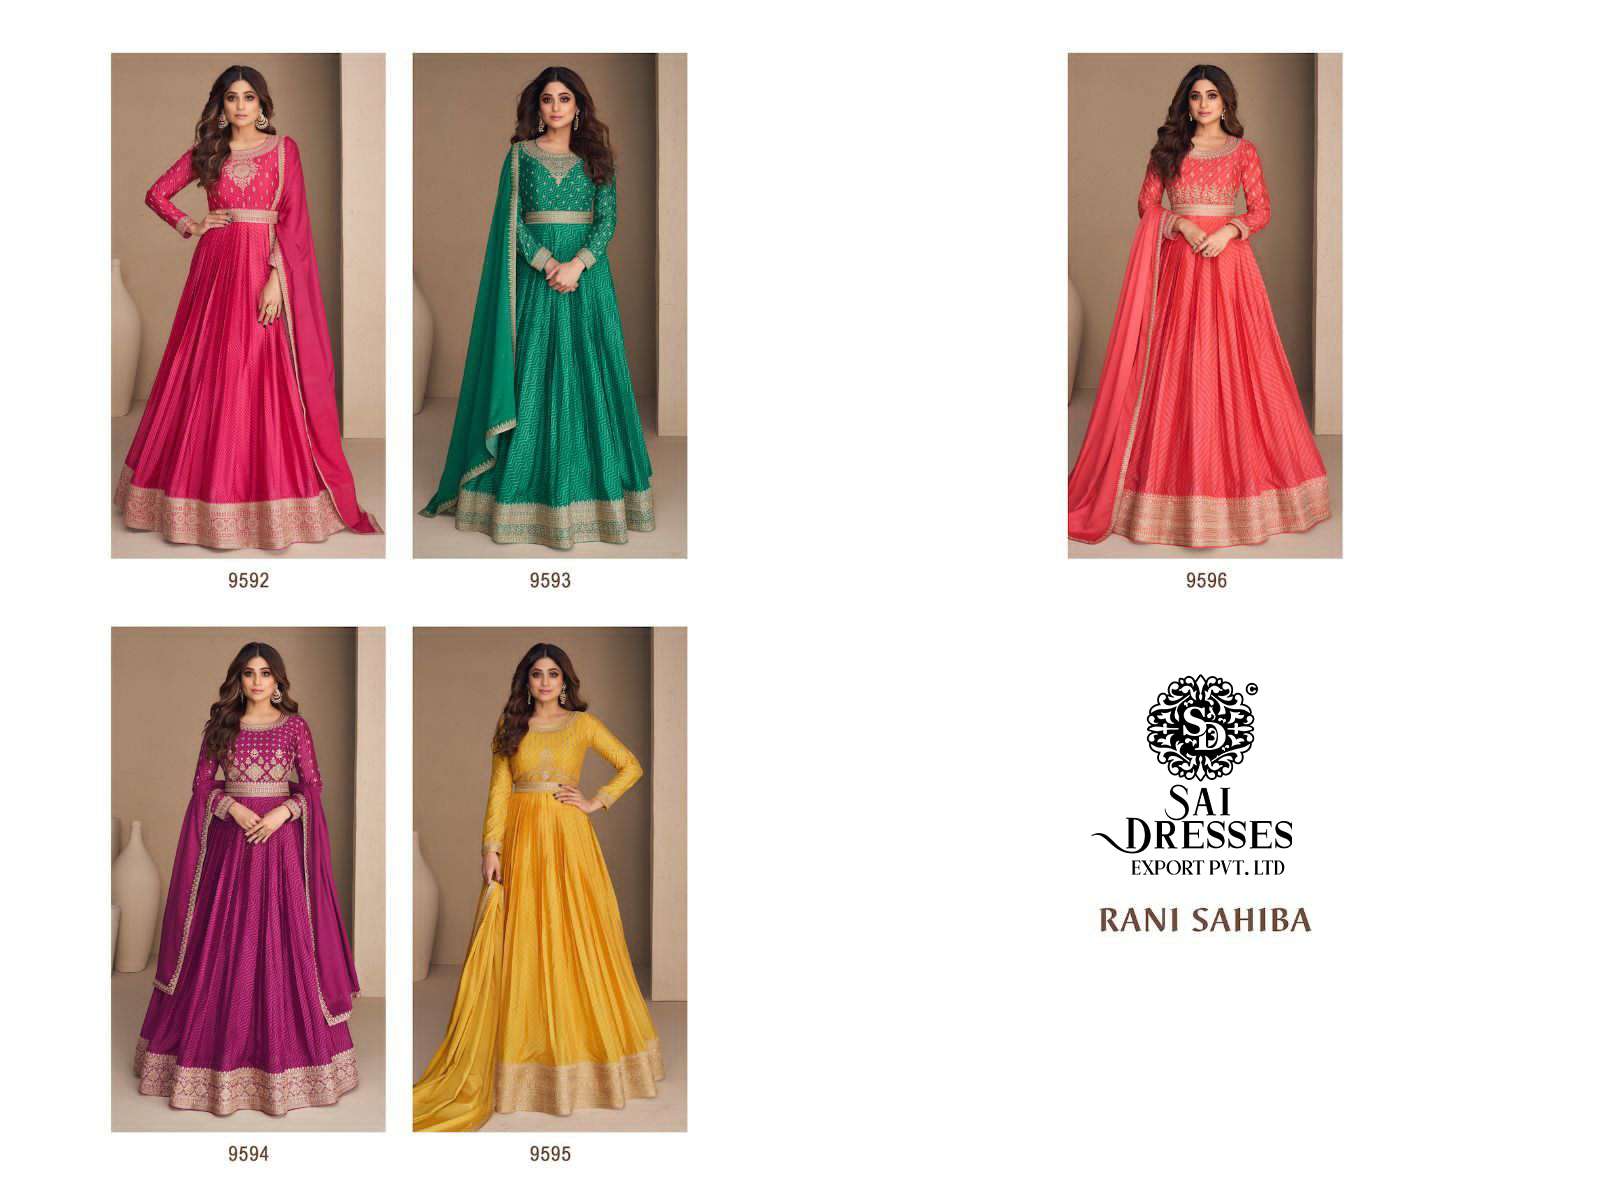 SAI DRESSES PRESENT RANI SAHIBA READYMADE WEDDING WEAR LONG GOWN STYLE DESIGNER SUITS IN WHOLESALE RATE IN SURAT 